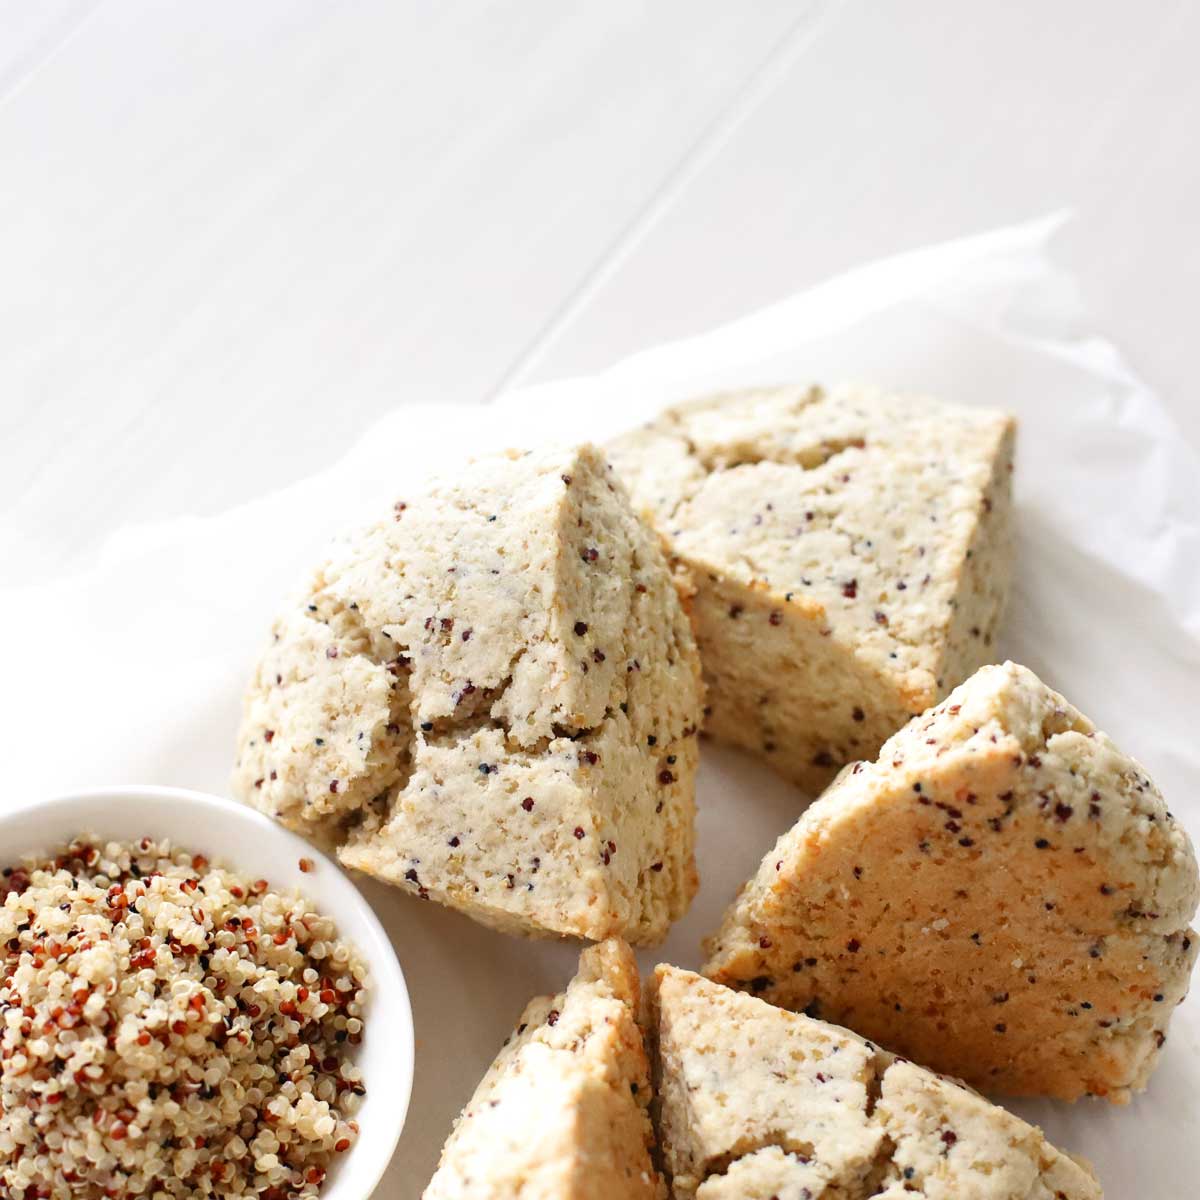 Nutty and Wholesome: Quinoa Scones for a Healthy, Vegan Twist - Vegan Carrot Cake Scones